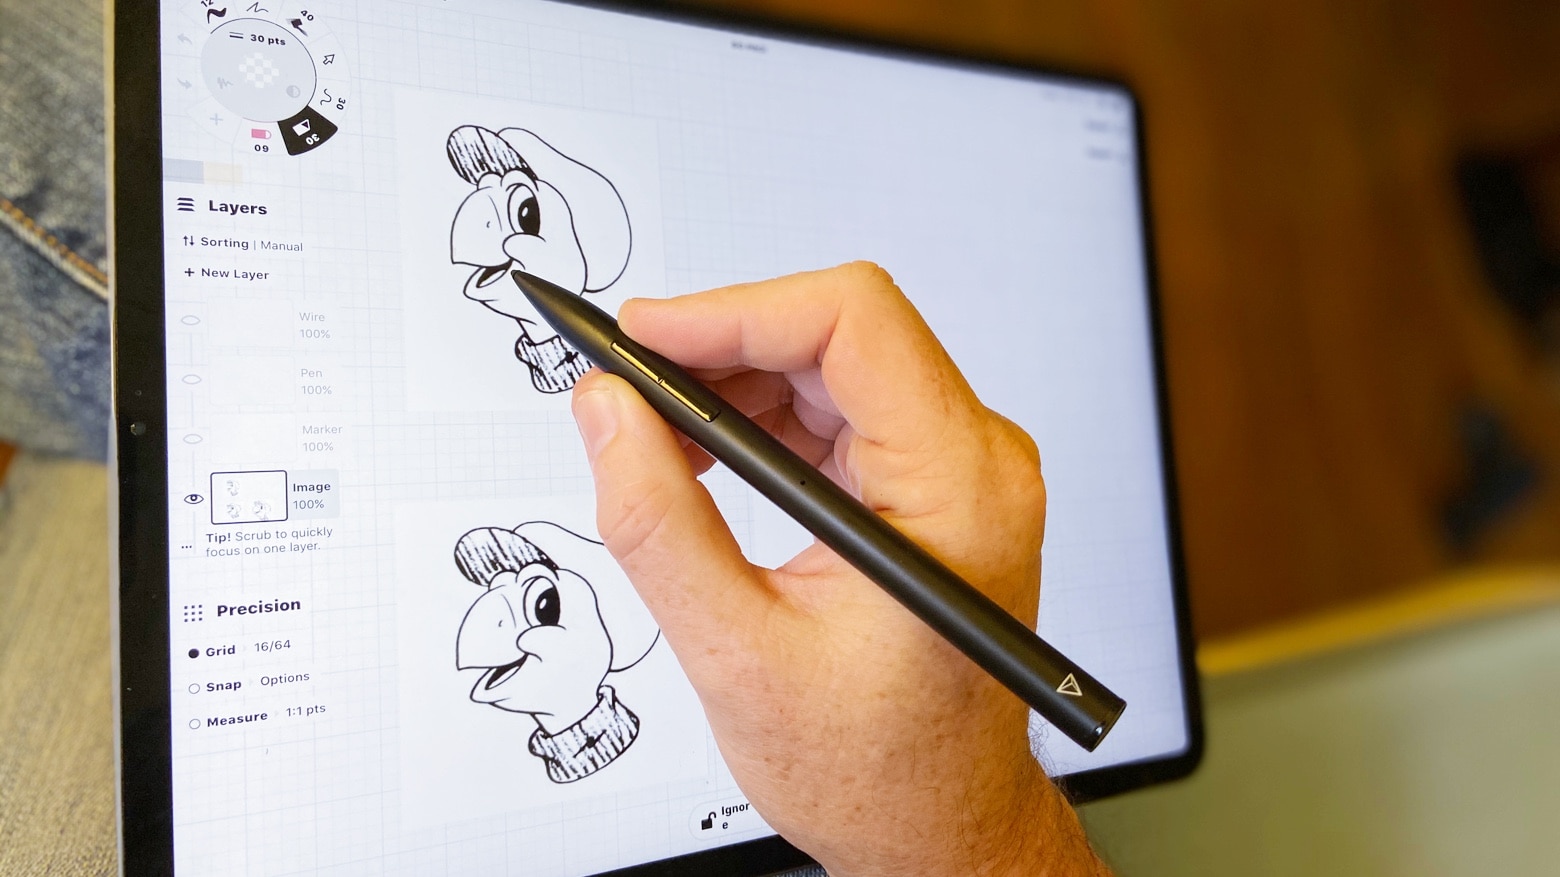 Adonit Note+ review: Affordable Apple Pencil competition | Cult of Mac